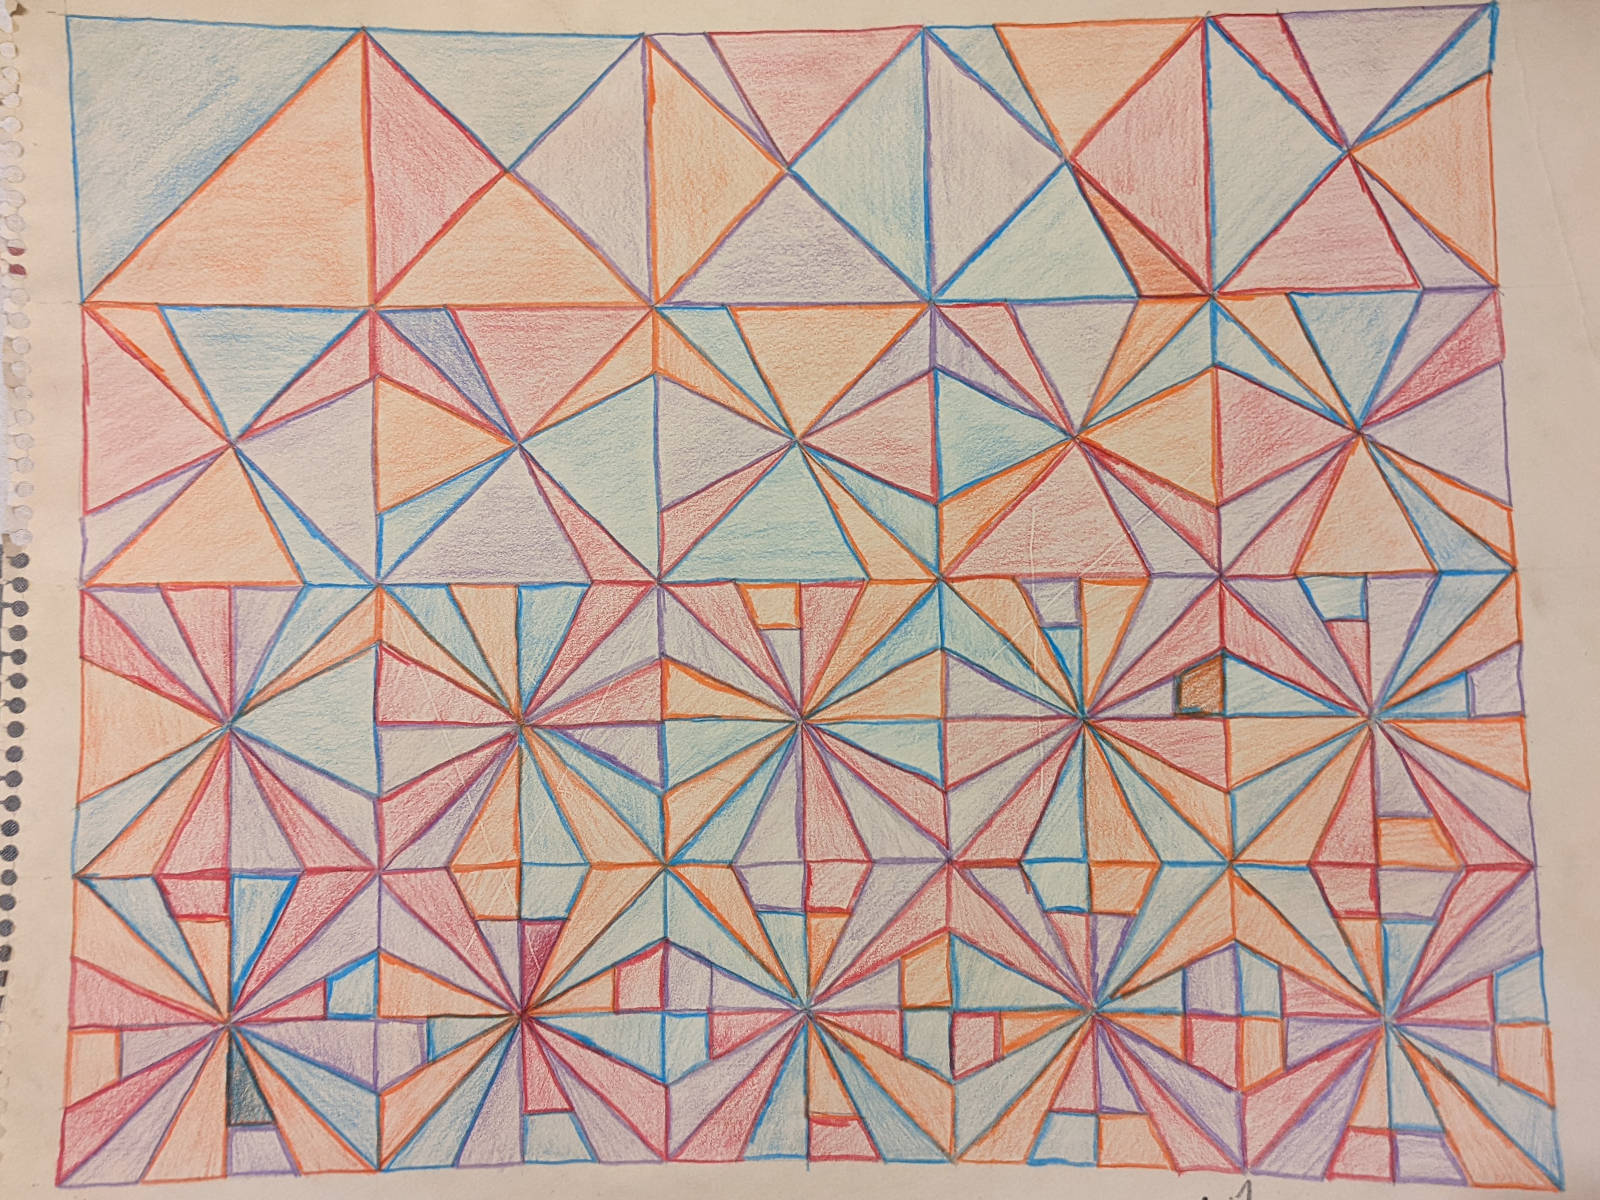 Pattern that starts as a diagonal line from one square, adding a new line for each box in a 4 by 4 grid of boxes.